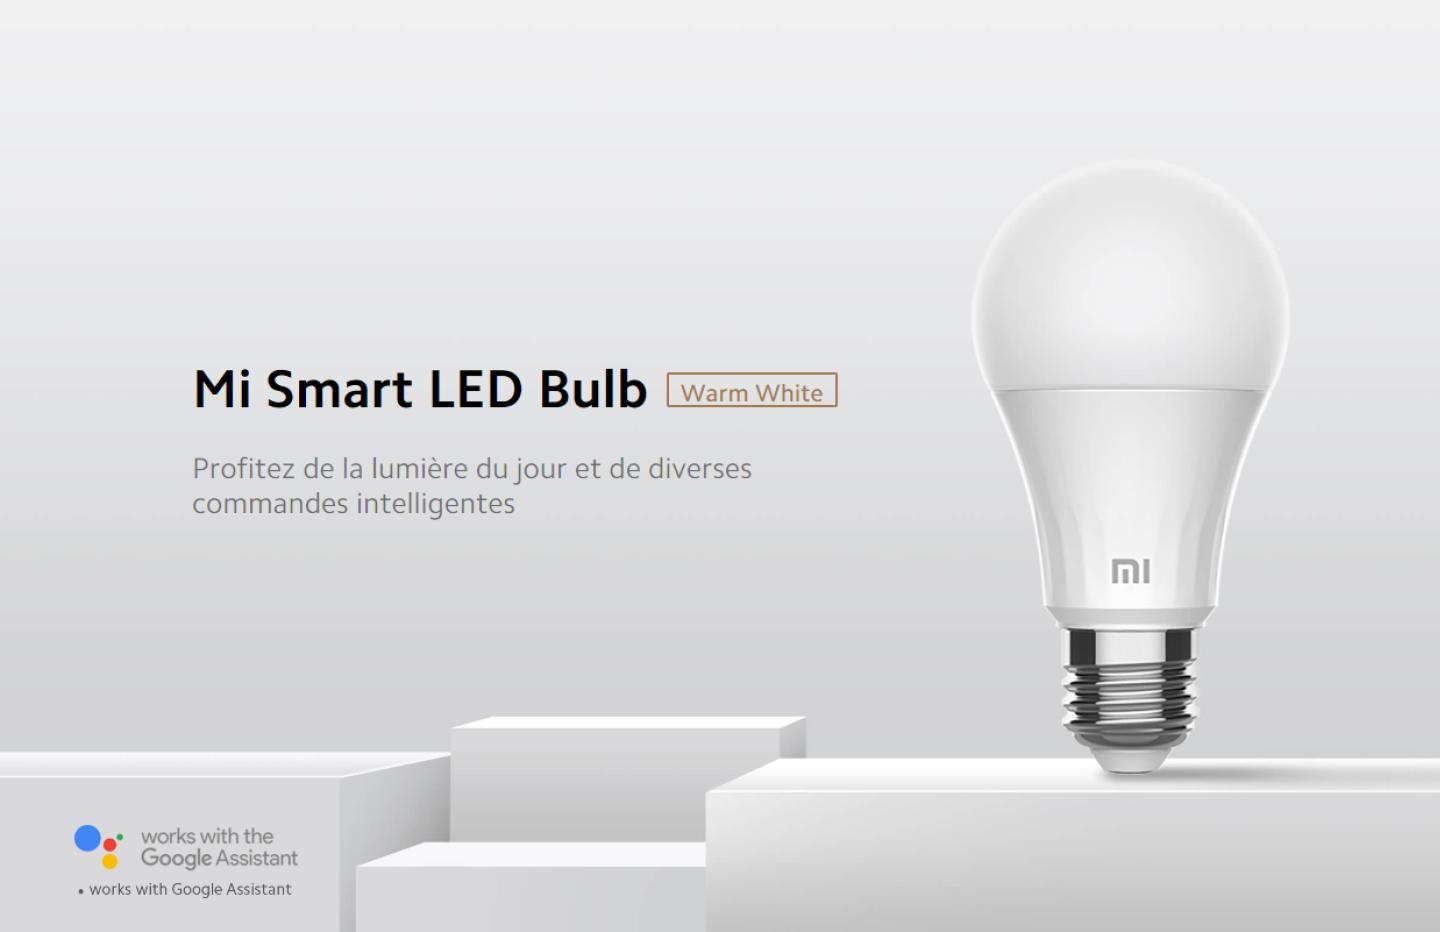 its cheapest smart bulb is on sale at only €5